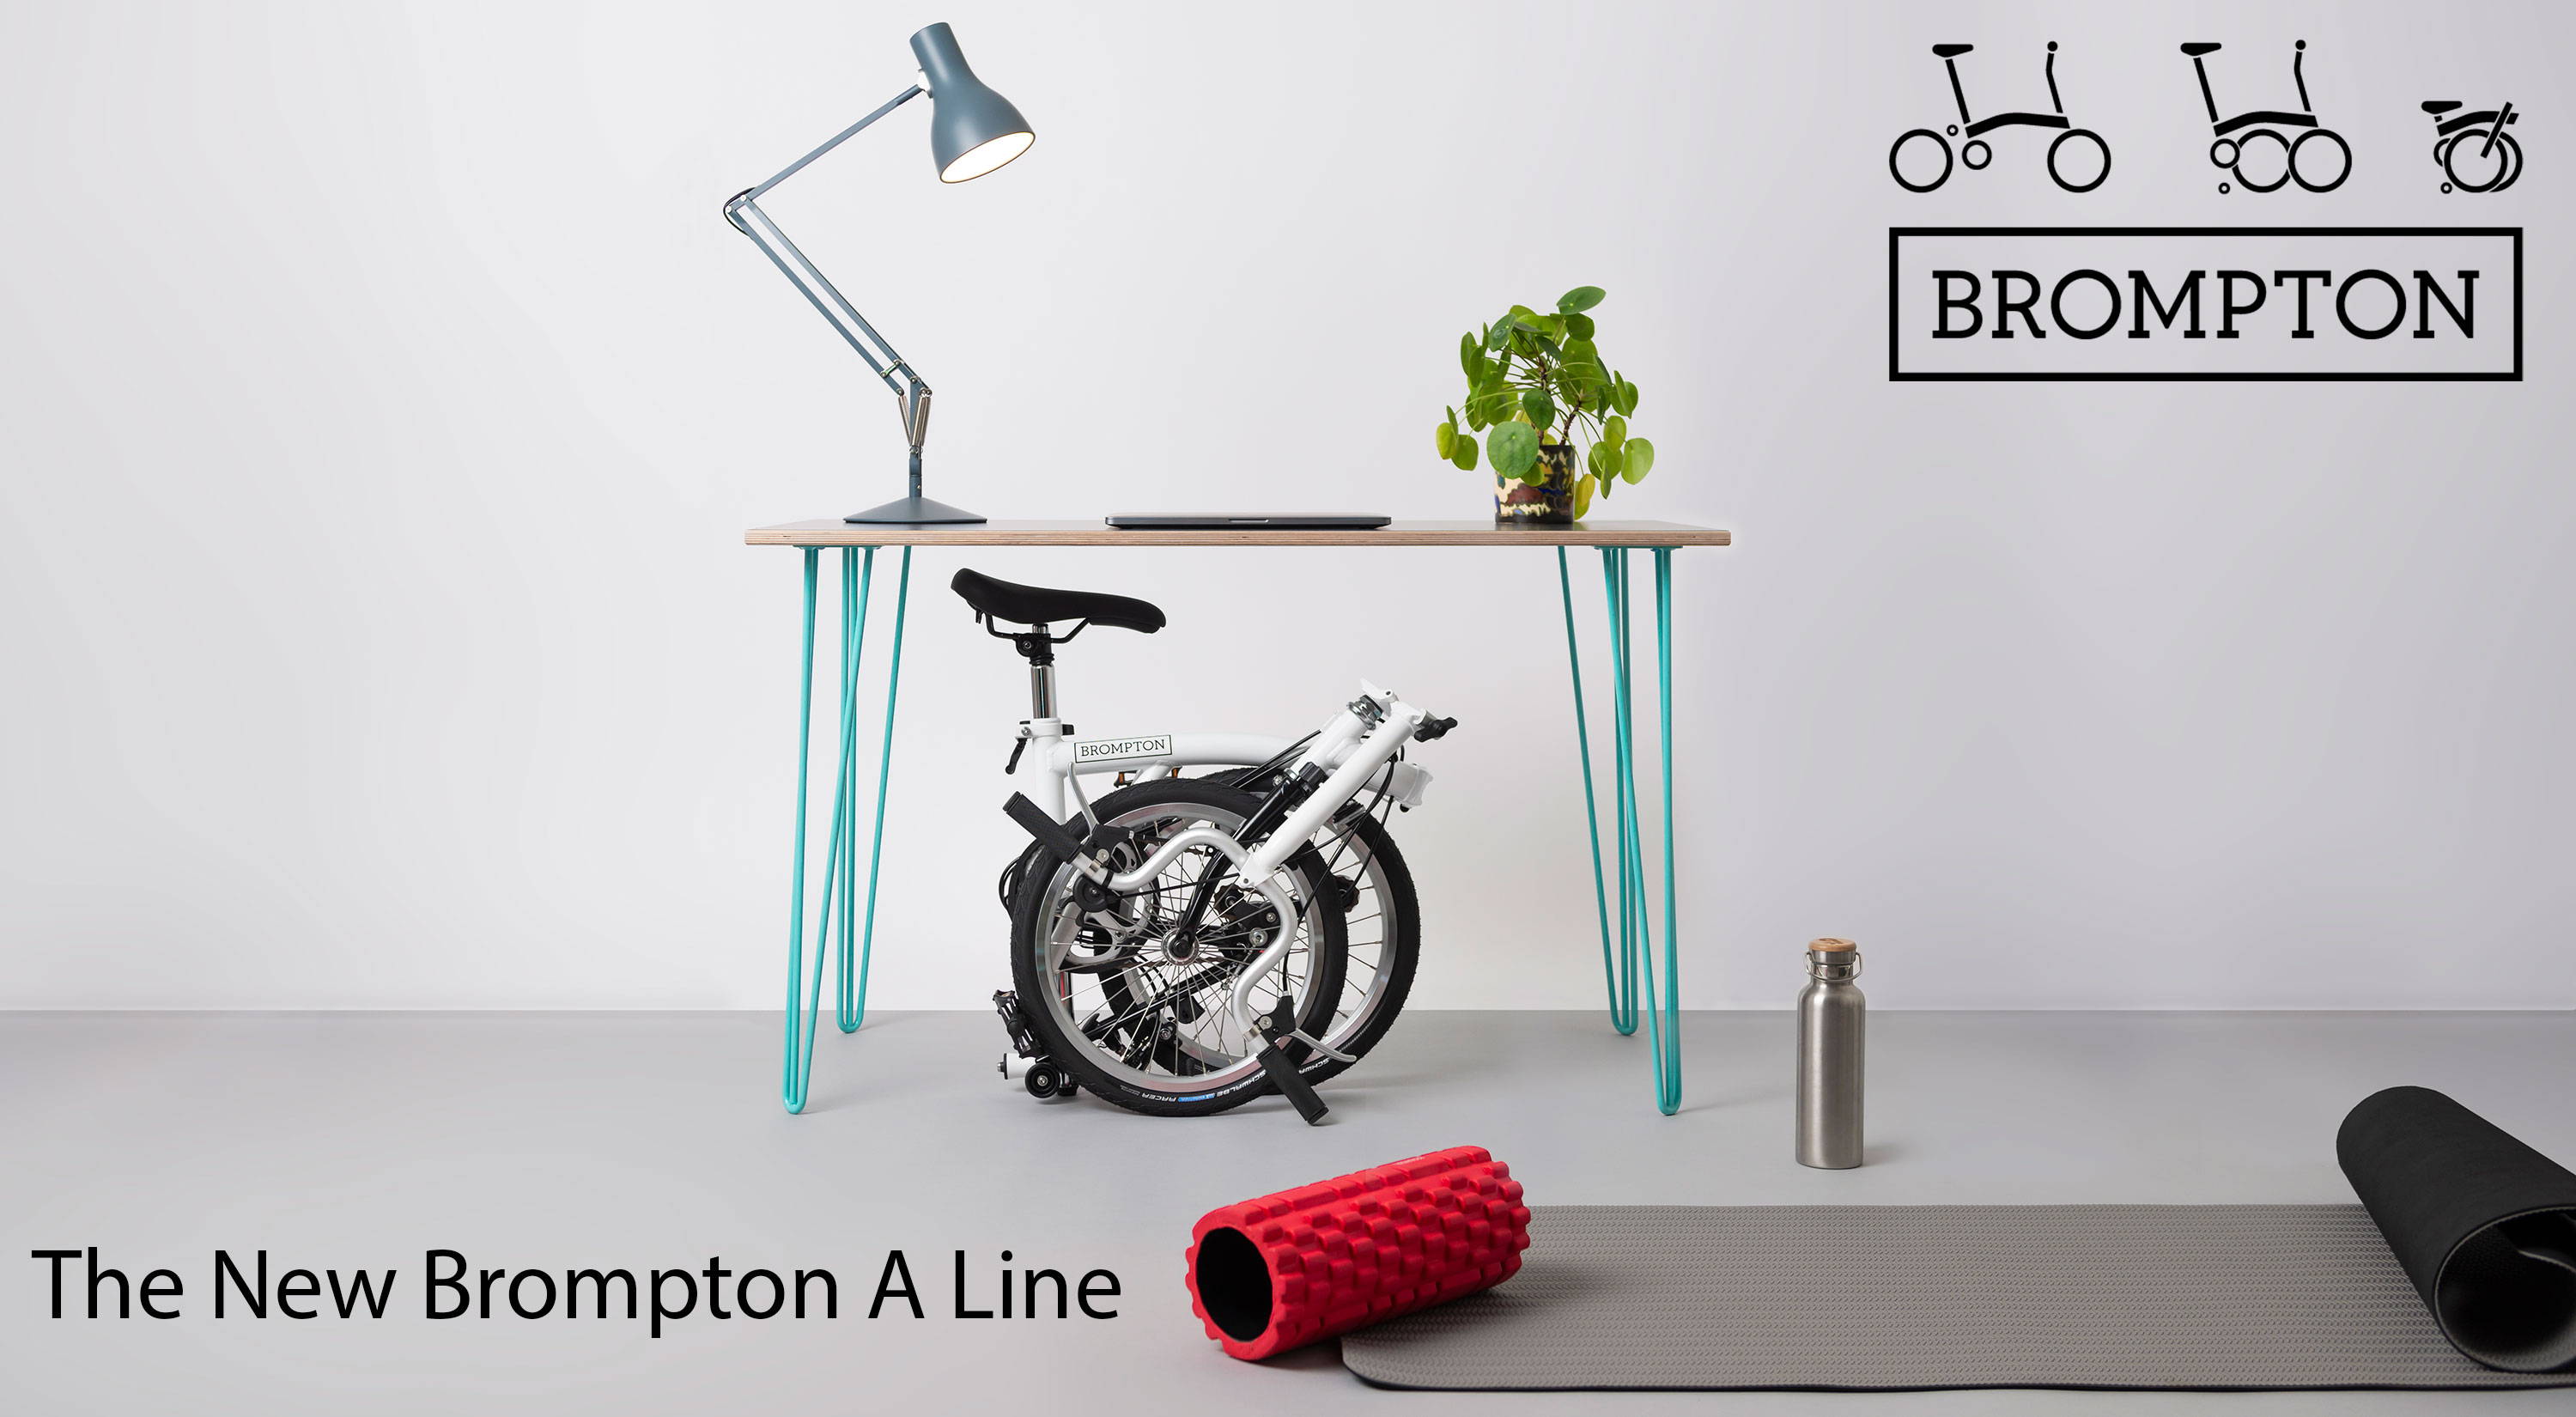 Brompton New A Line Folding Bike - Previously called the B75